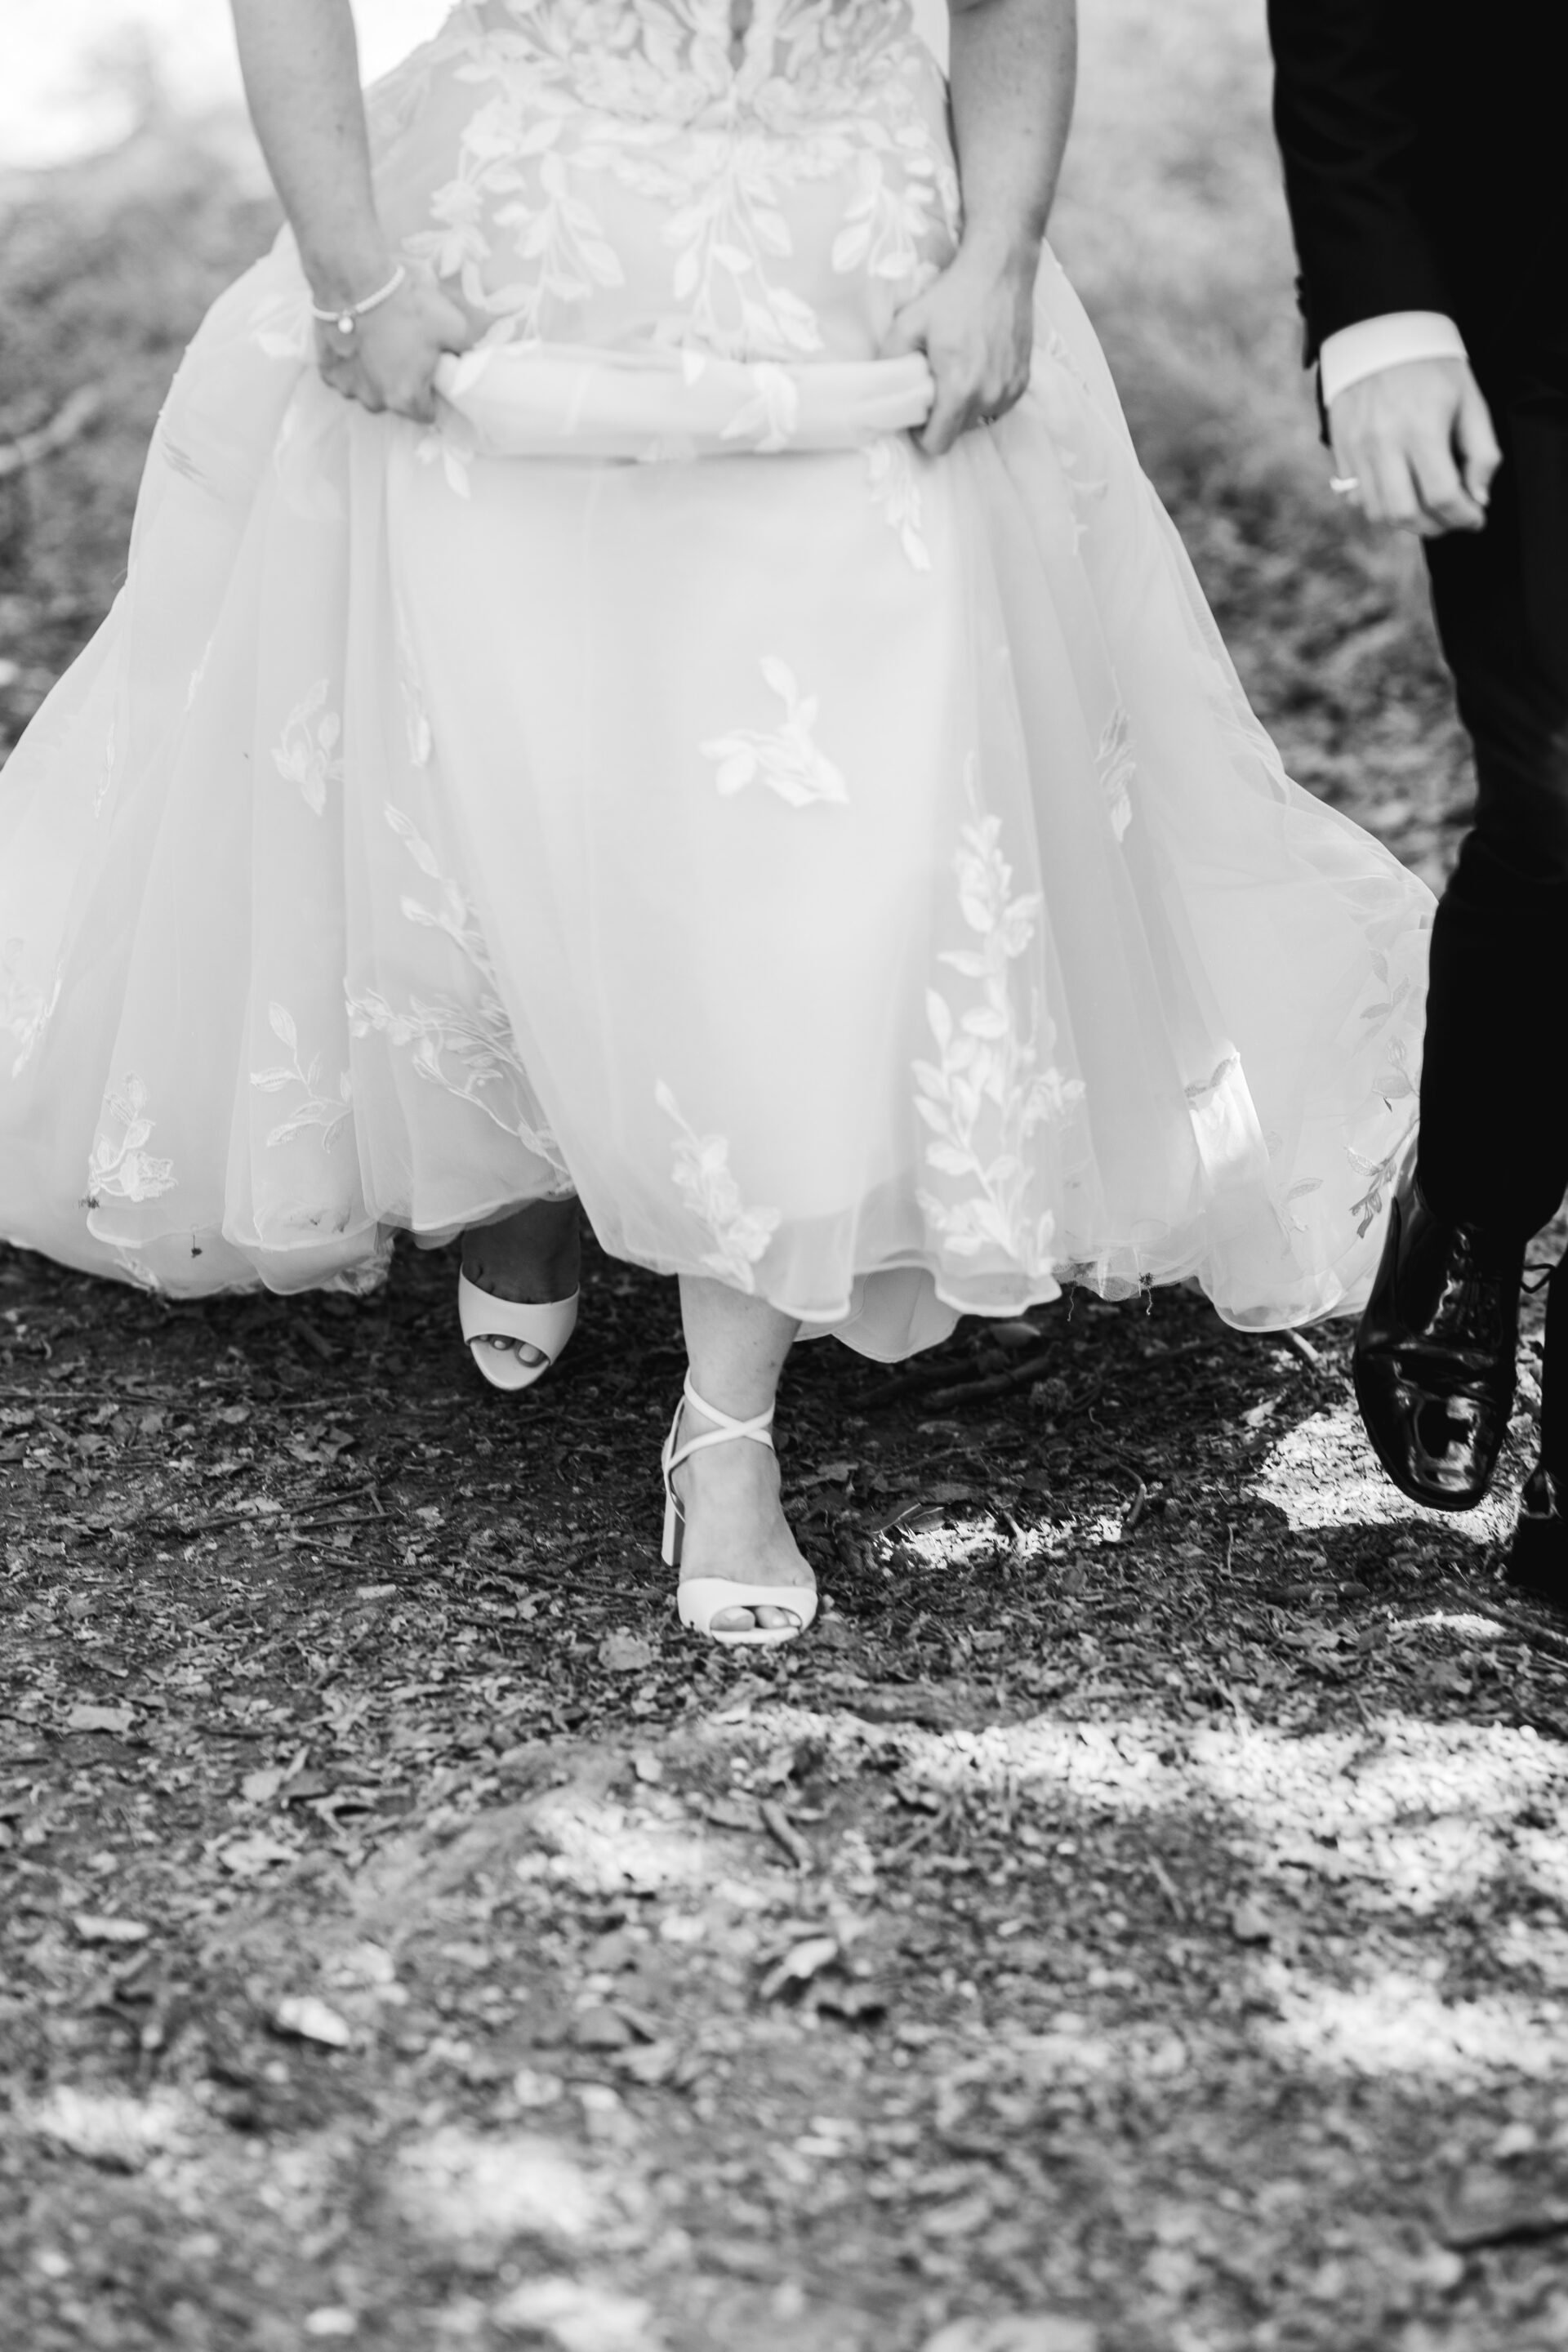 Bridal shoes captured at Old Luxters Barn in Oxfordshire